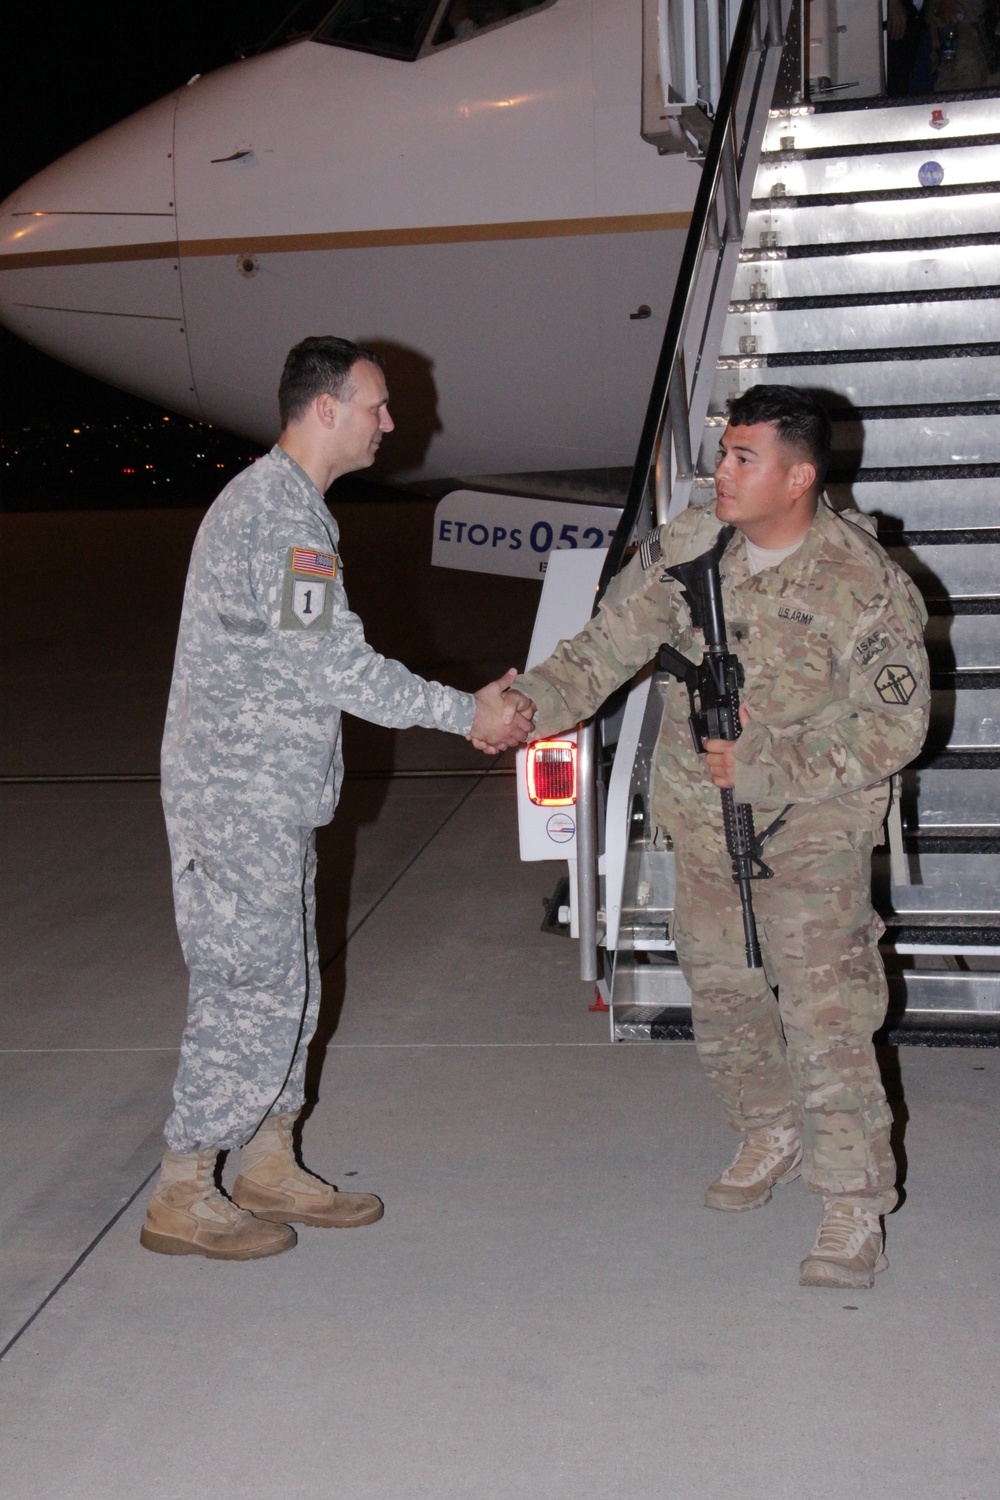 305th Engineer Company redeploys from Afghanistan